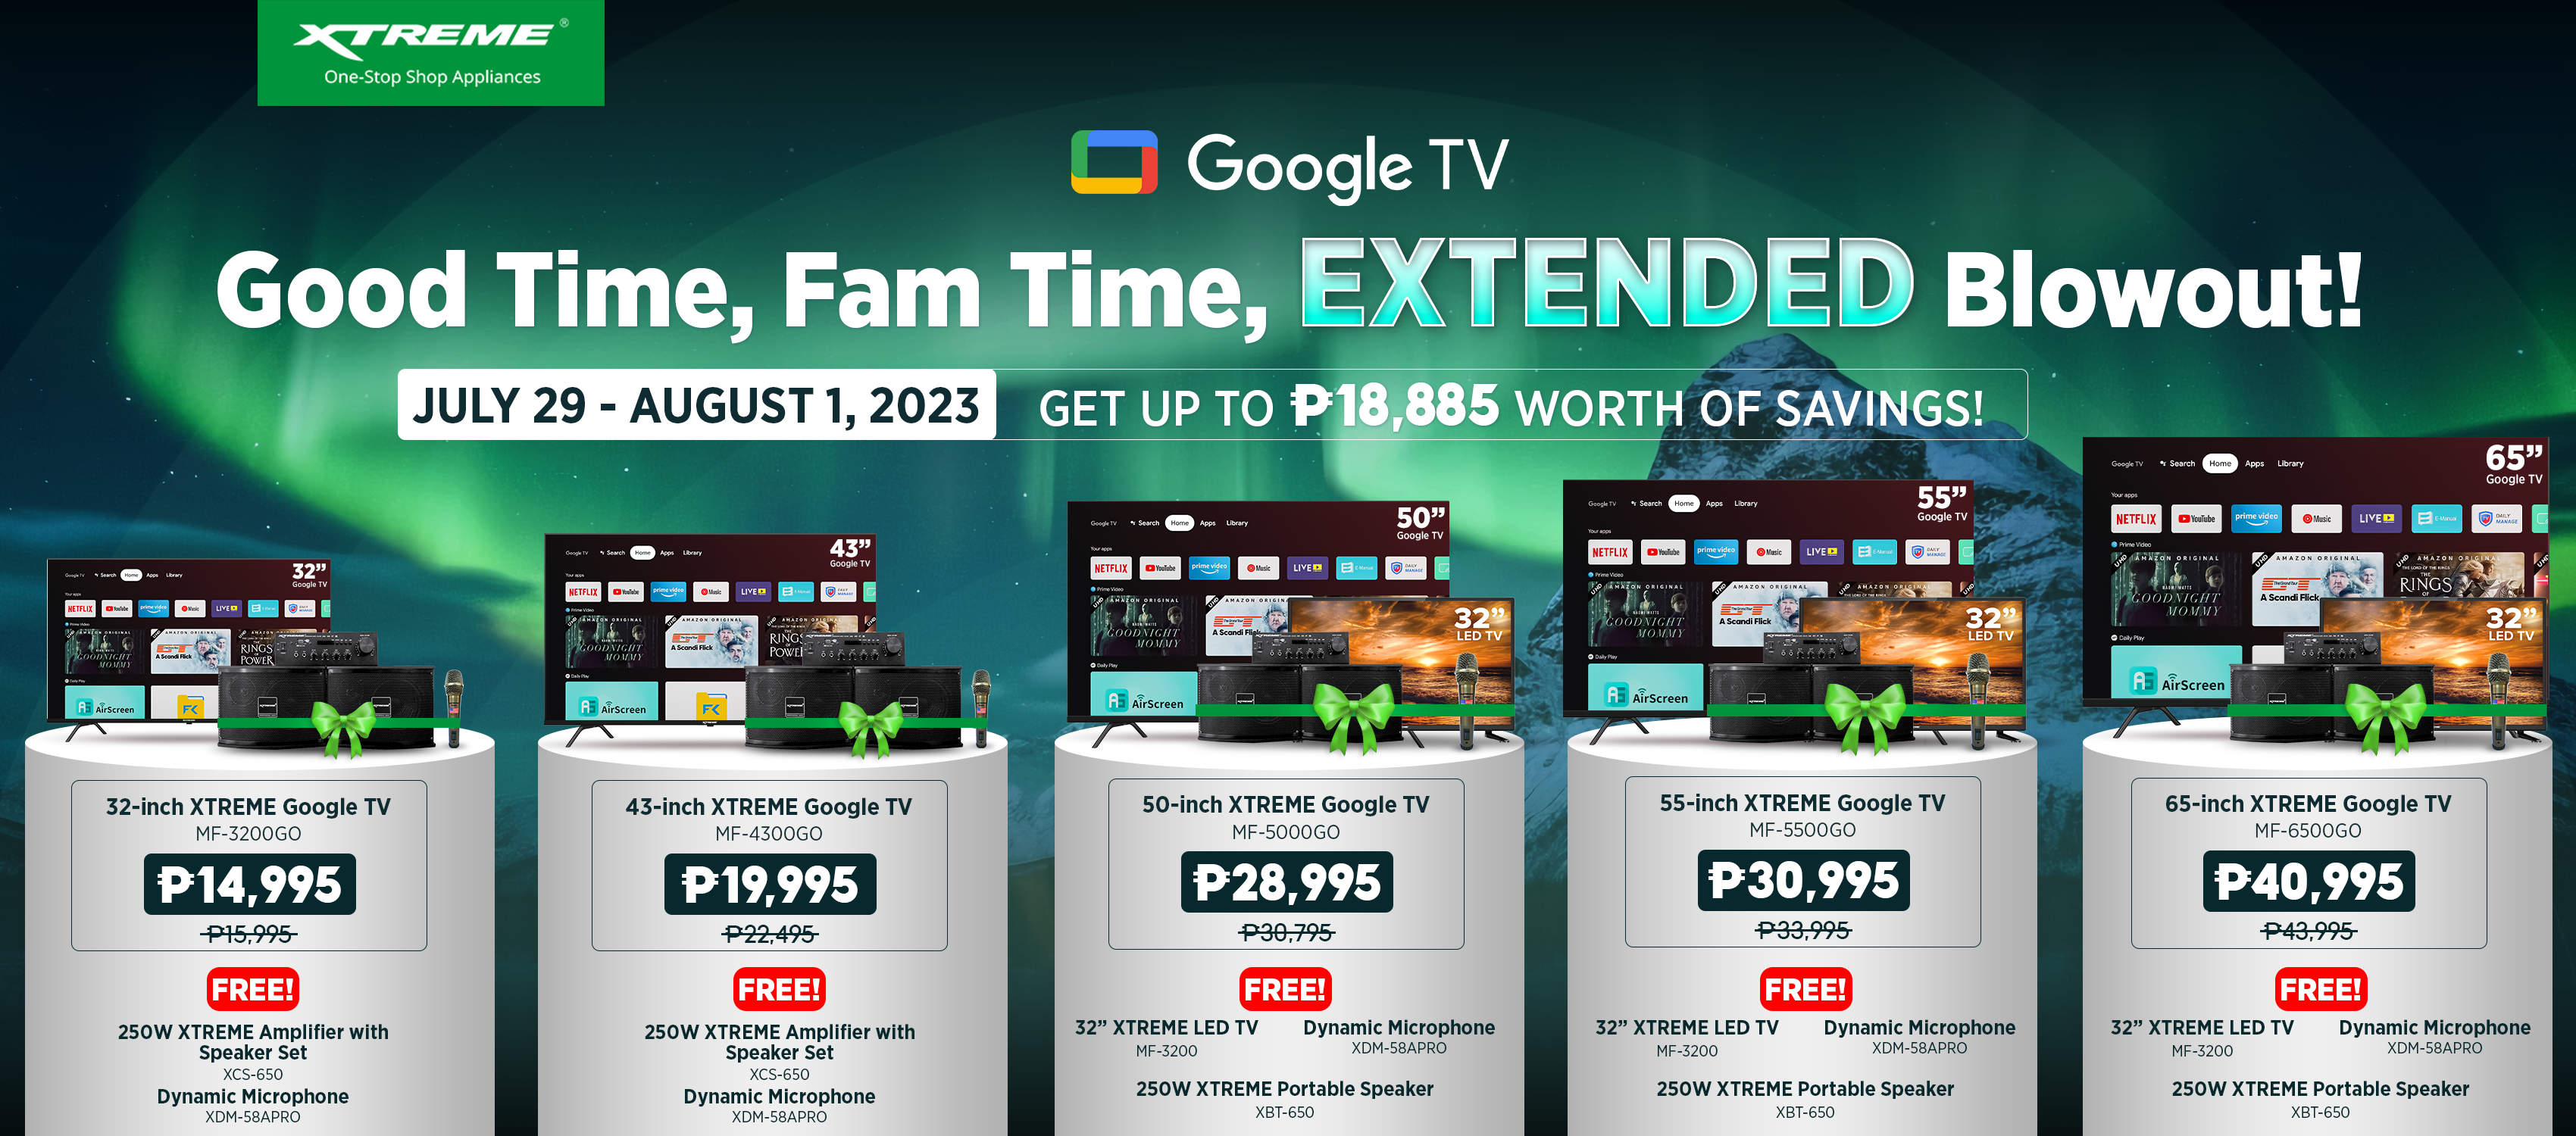 Extended Blowout Sale of XTREME GO SERIES TV!